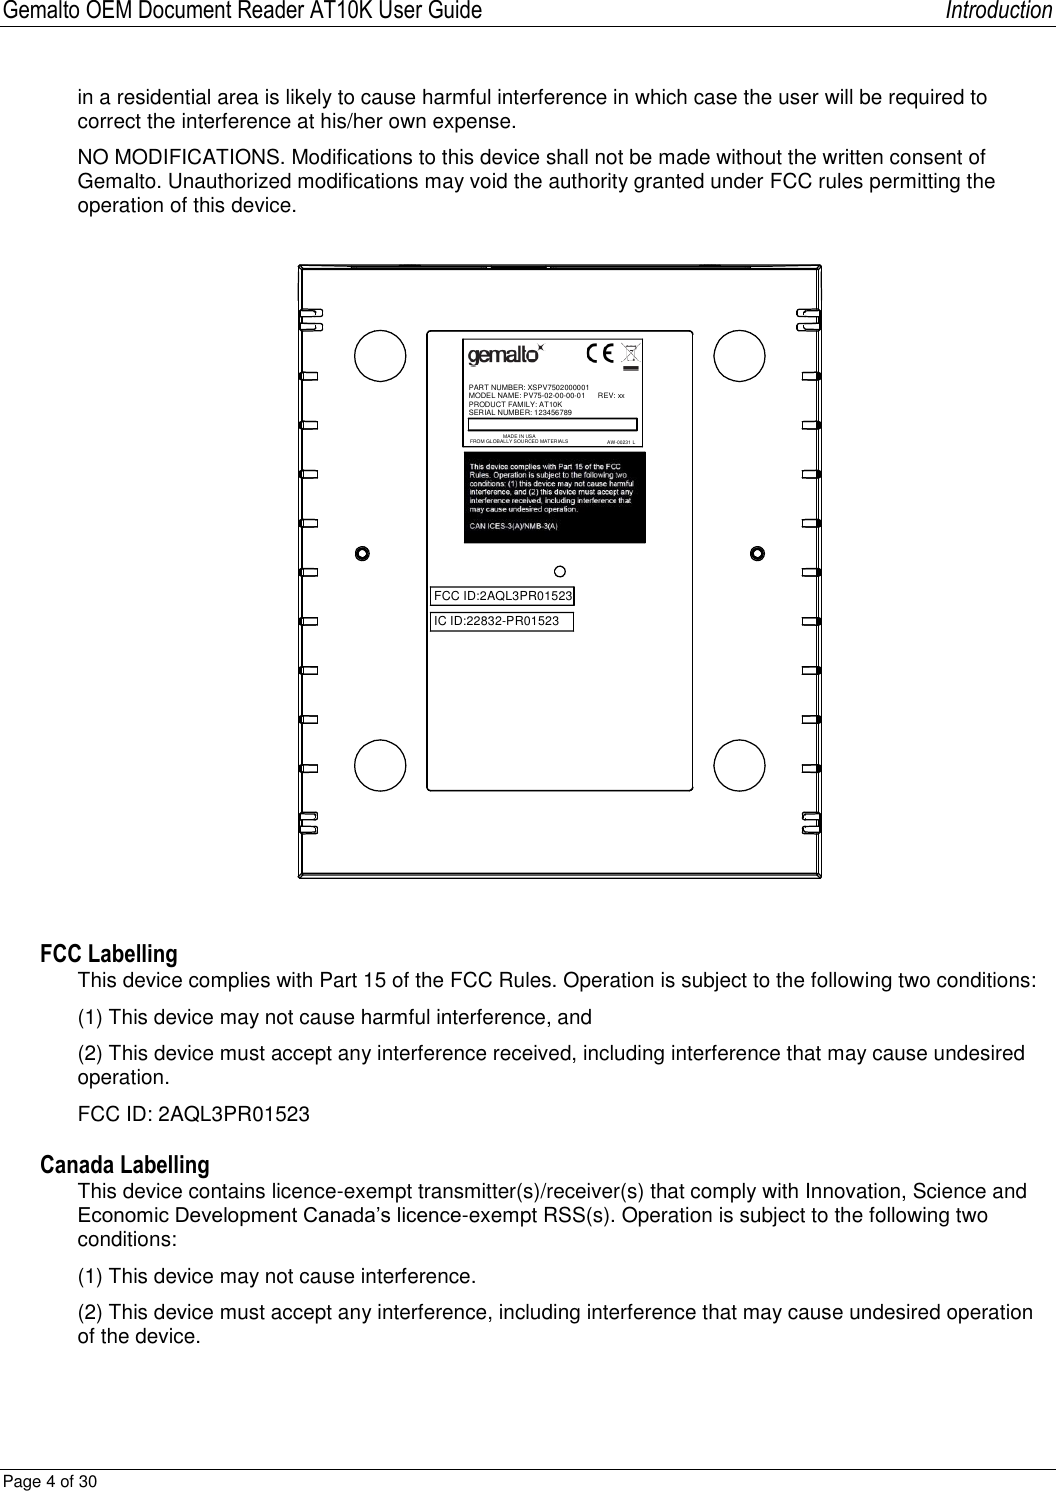 Gemalto OEM Document Reader AT10K User Guide   Introduction Page 4 of 30  in a residential area is likely to cause harmful interference in which case the user will be required to correct the interference at his/her own expense. NO MODIFICATIONS. Modifications to this device shall not be made without the written consent of Gemalto. Unauthorized modifications may void the authority granted under FCC rules permitting the operation of this device. PART NUMBER: XSPV7502000001MODEL NAME: PV75-02-00-00-01      REV: xxPRODUCT FAMILY: AT10KSERIAL NUMBER: 123456789MADE IN USAFROM GLOBALLY SOURCED MATERIALS AW-00231 LFCC ID:2AQL3PR01523IC ID:22832-PR01523 FCC Labelling This device complies with Part 15 of the FCC Rules. Operation is subject to the following two conditions: (1) This device may not cause harmful interference, and (2) This device must accept any interference received, including interference that may cause undesired operation. FCC ID: 2AQL3PR01523 Canada Labelling This device contains licence-exempt transmitter(s)/receiver(s) that comply with Innovation, Science and Economic Development Canada’s licence-exempt RSS(s). Operation is subject to the following two conditions: (1) This device may not cause interference. (2) This device must accept any interference, including interference that may cause undesired operation of the device.  